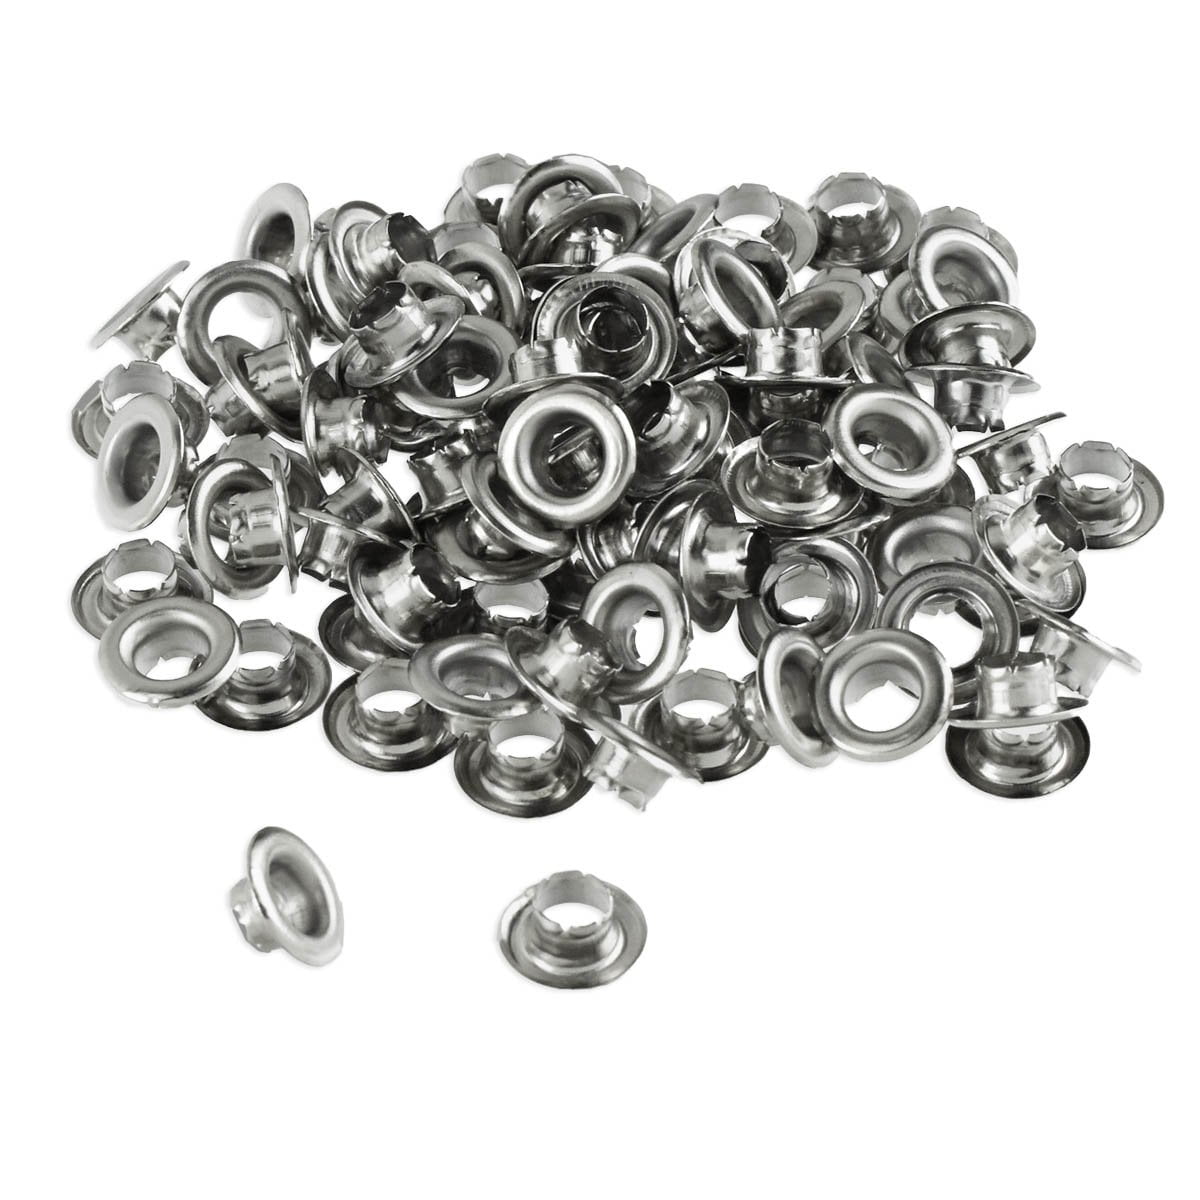 Hilitchi 200Pcs 1/2 Inch - 12mm Silver Thicken Grommet Eyelets Metal  Eyelets with Washers Assortment Kit, Hole Self Backing Eyelet for Bead  Cores